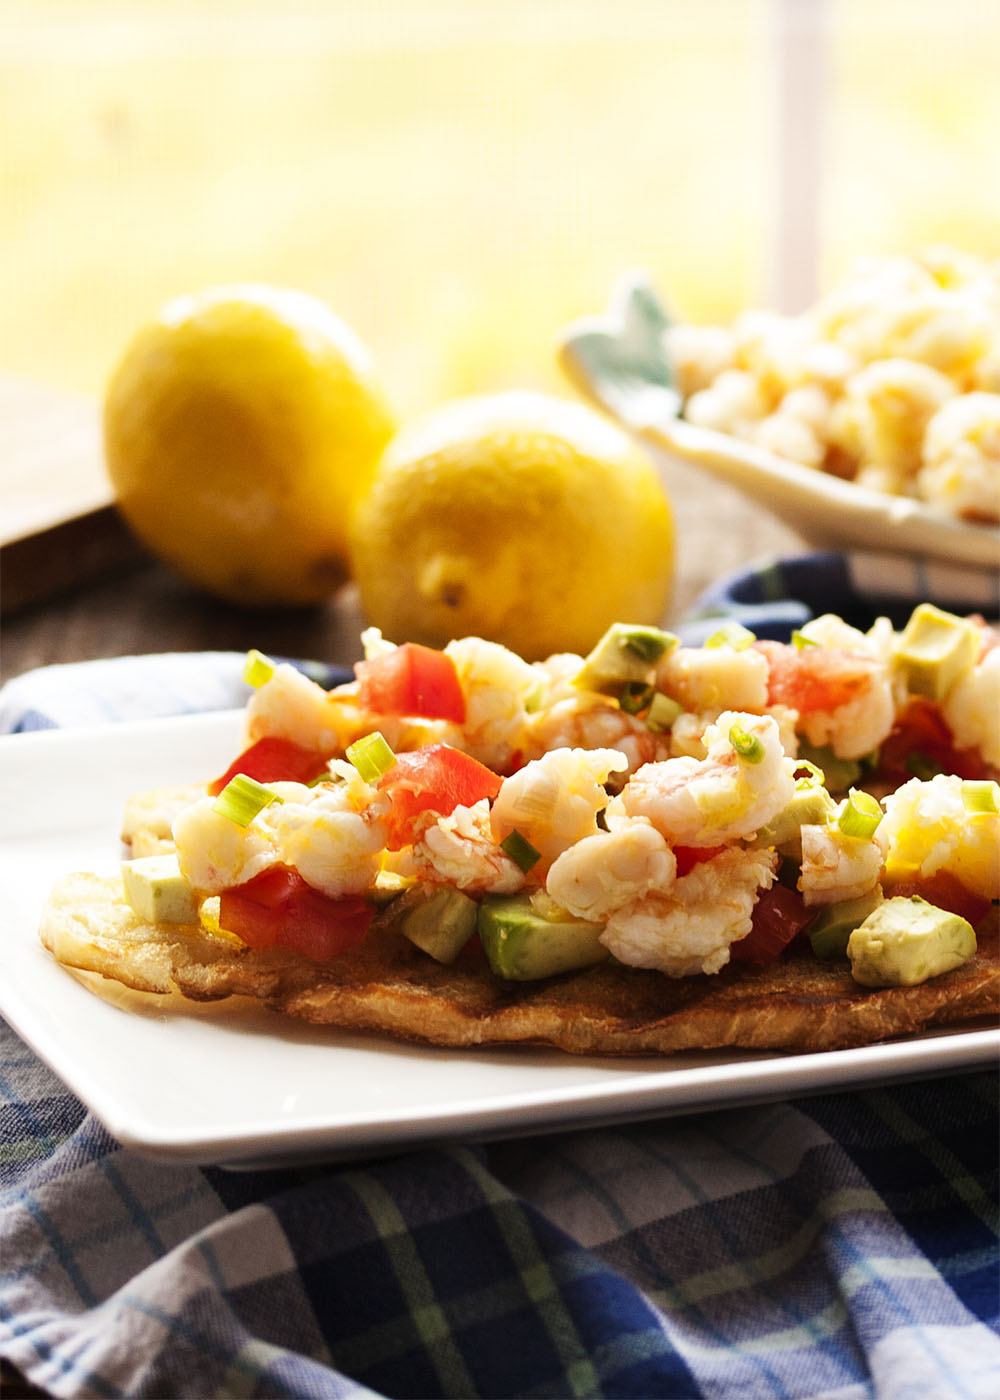 Tomato and Avocado Shrimp Crostini - Beautifully poached shrimp are marinated in lemon and olive oil and paired with grilled bread, diced tomato, and avocado in this Shrimp Crostini. Poaching keeps the shrimp tender and infuses them with flavor. So good! | justalittlebitofbacon.com